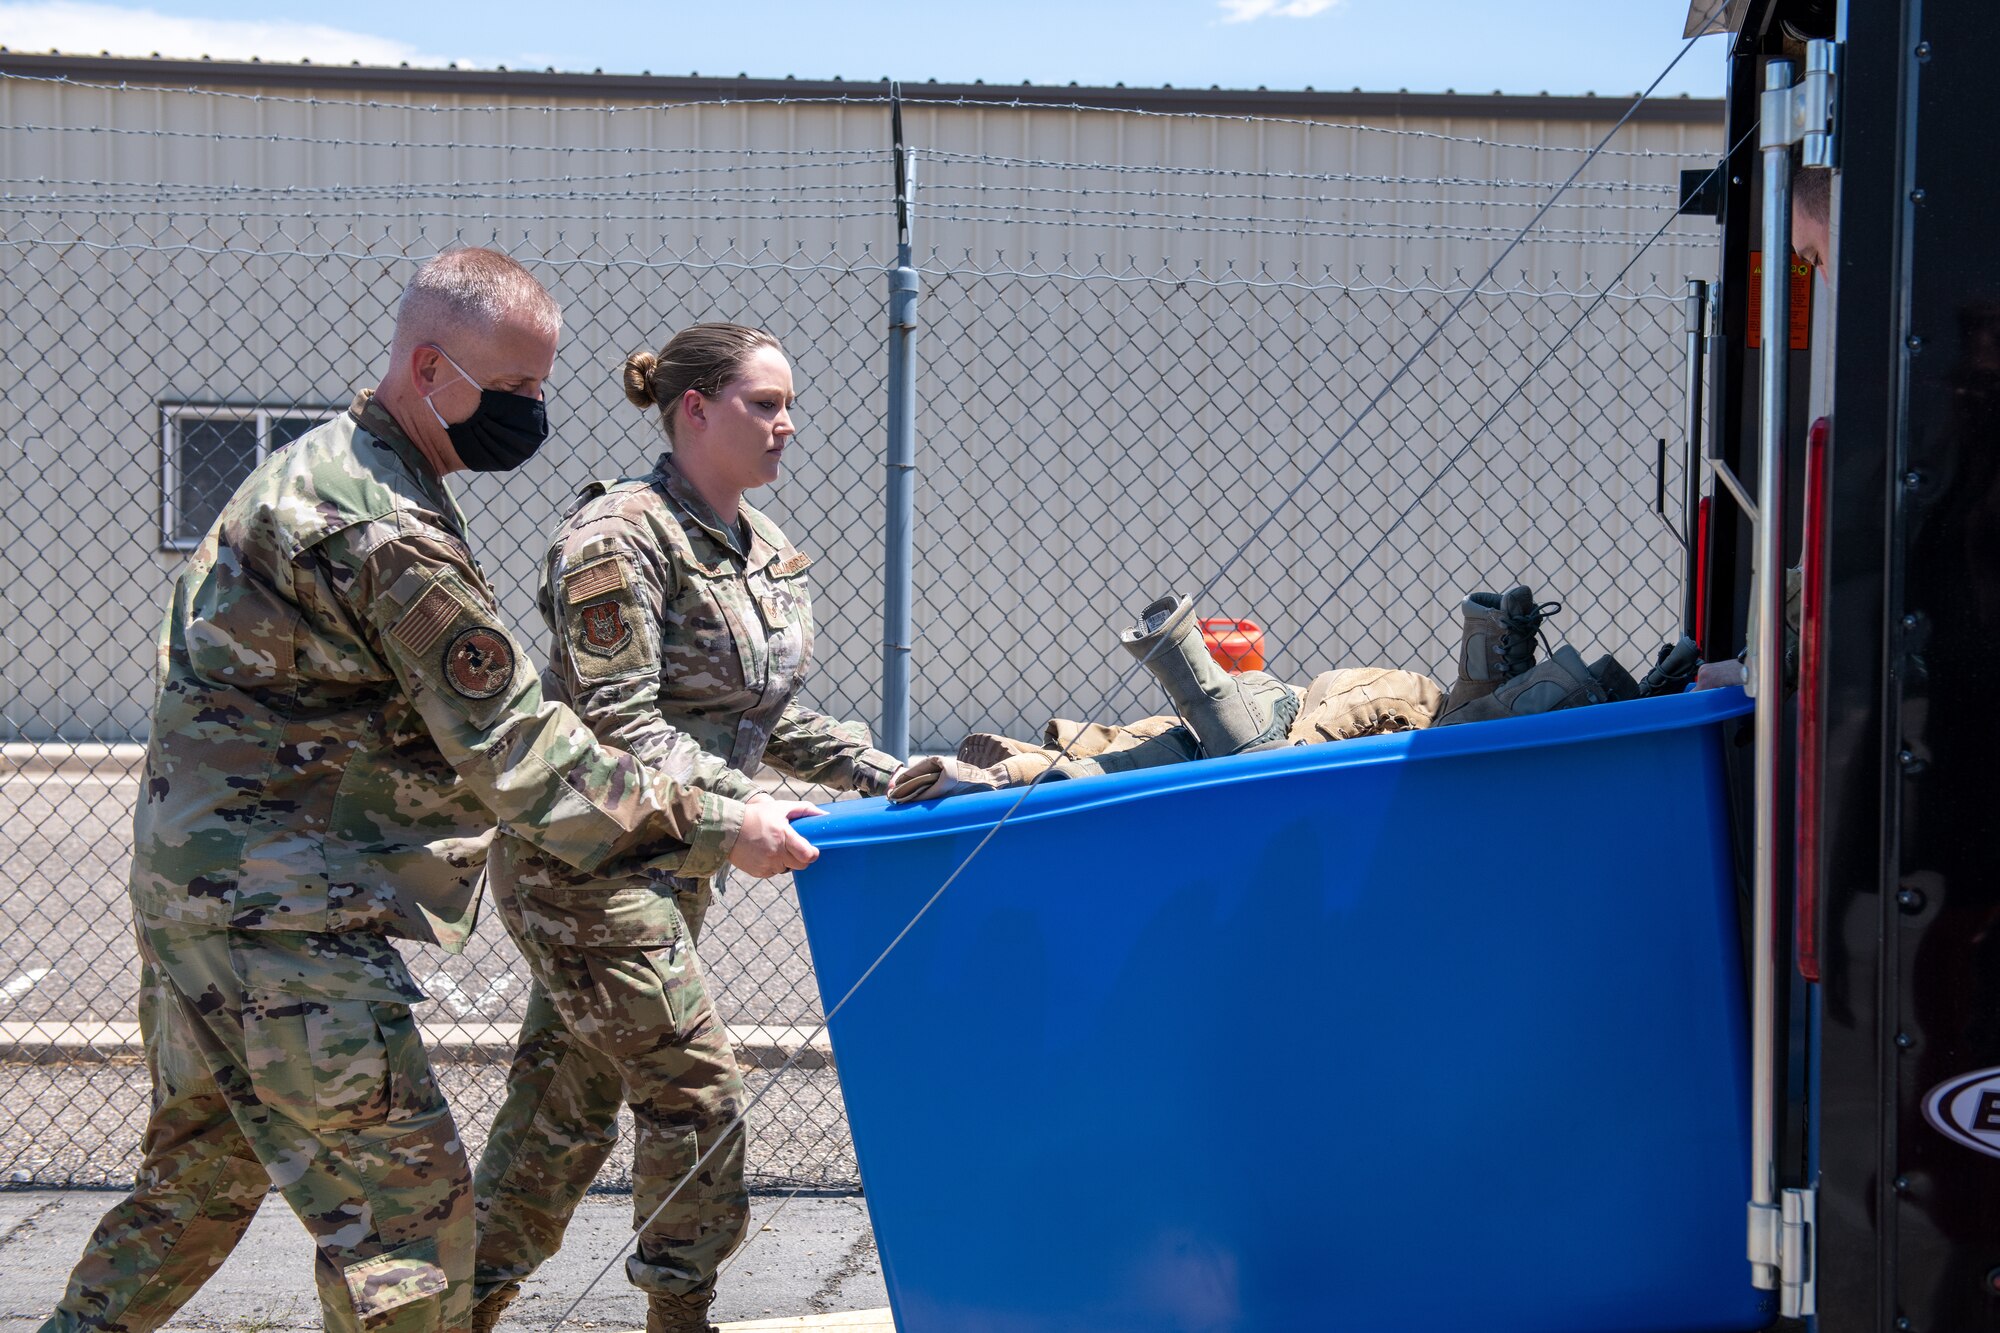 Col. Brett Newman, 419th Maintenance Group commander, helps Staff Sgt. Jayci Winter from the 419th MXG push a cart of collected boots into a trailer for a boot drive at Hill Air Force Base, Utah, on July 7, 2021.